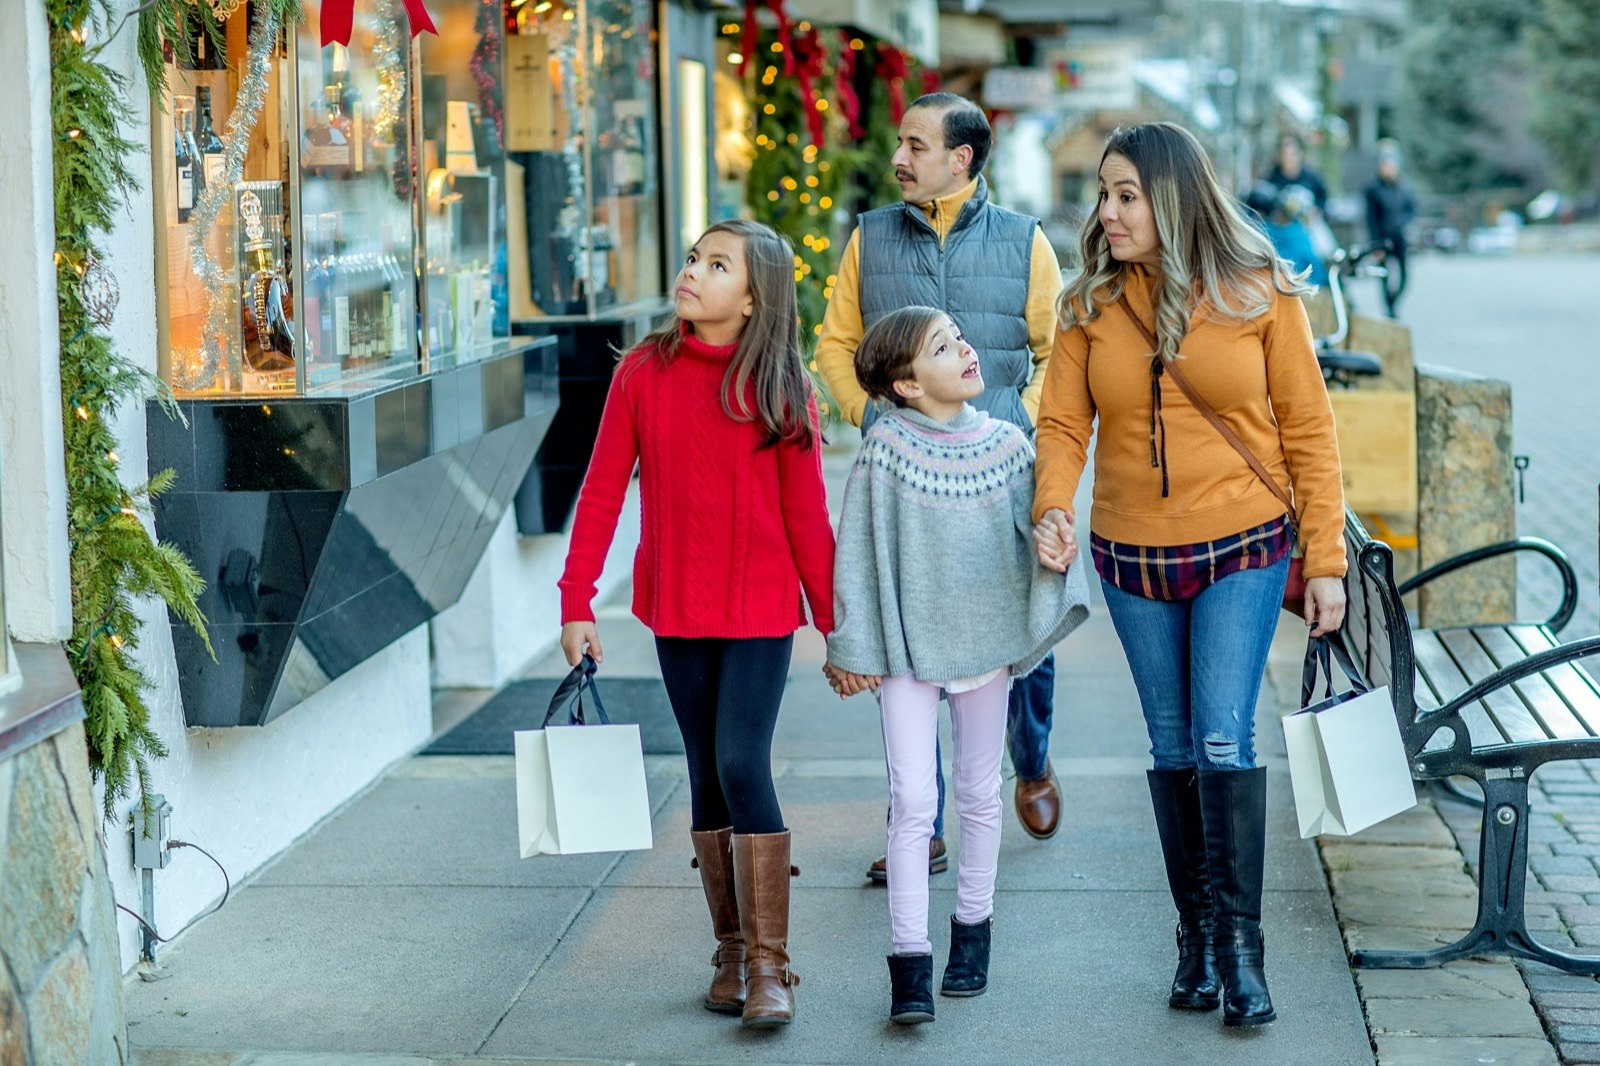 Family walks together down the street shopping in Vail Village